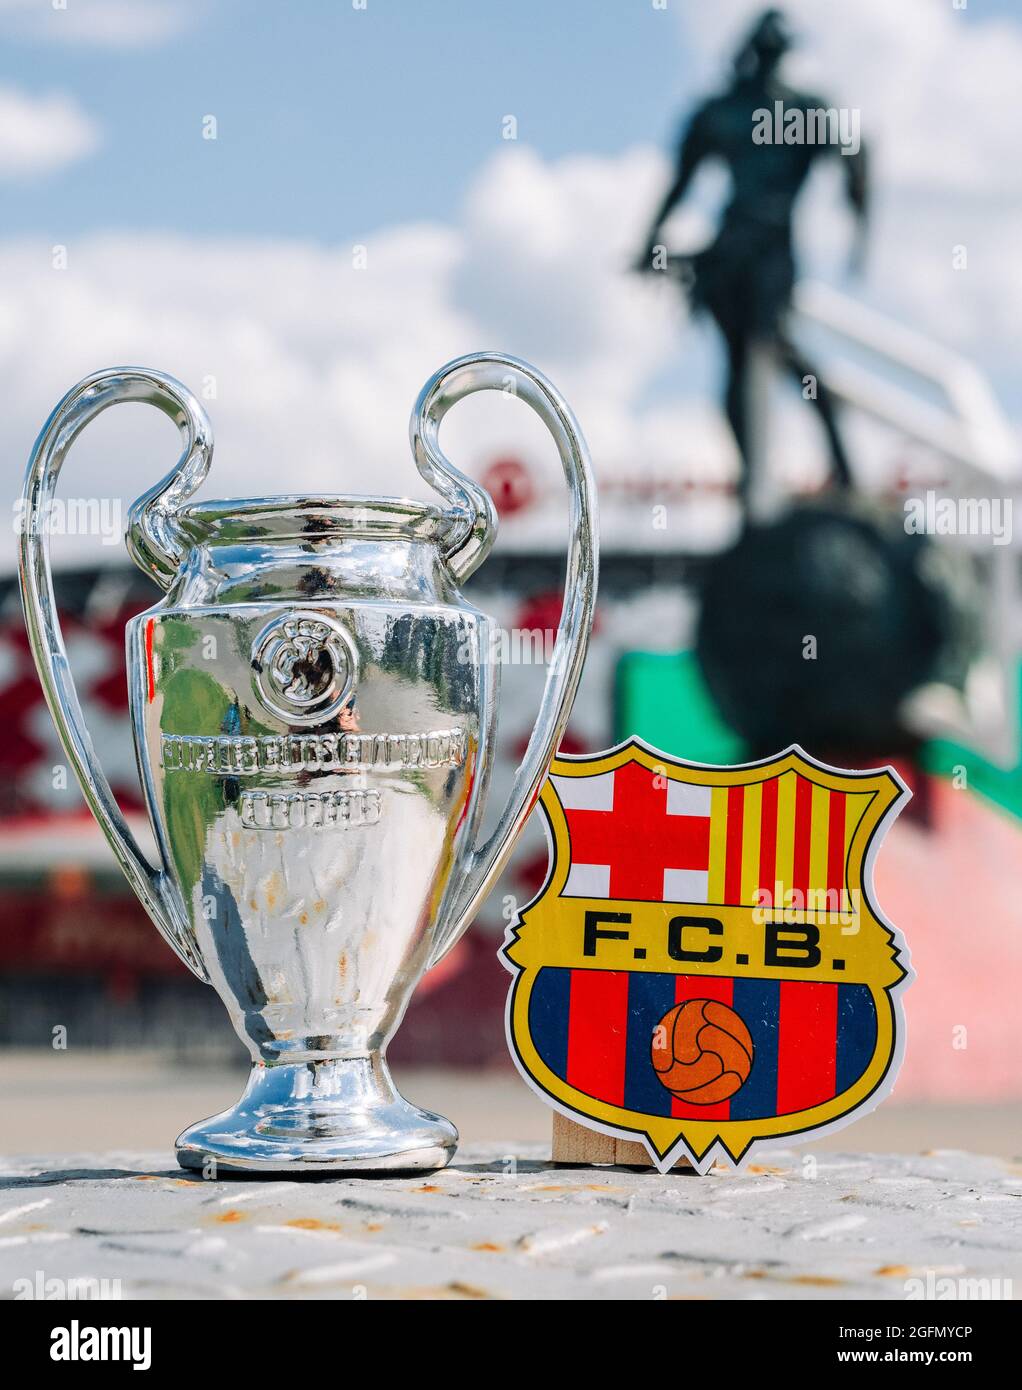 June 14 21 Barcelona Spain The Fc Barcelona Emblem And The Uefa Champions League Cup Against The Backdrop Of A Modern Stadium Stock Photo Alamy